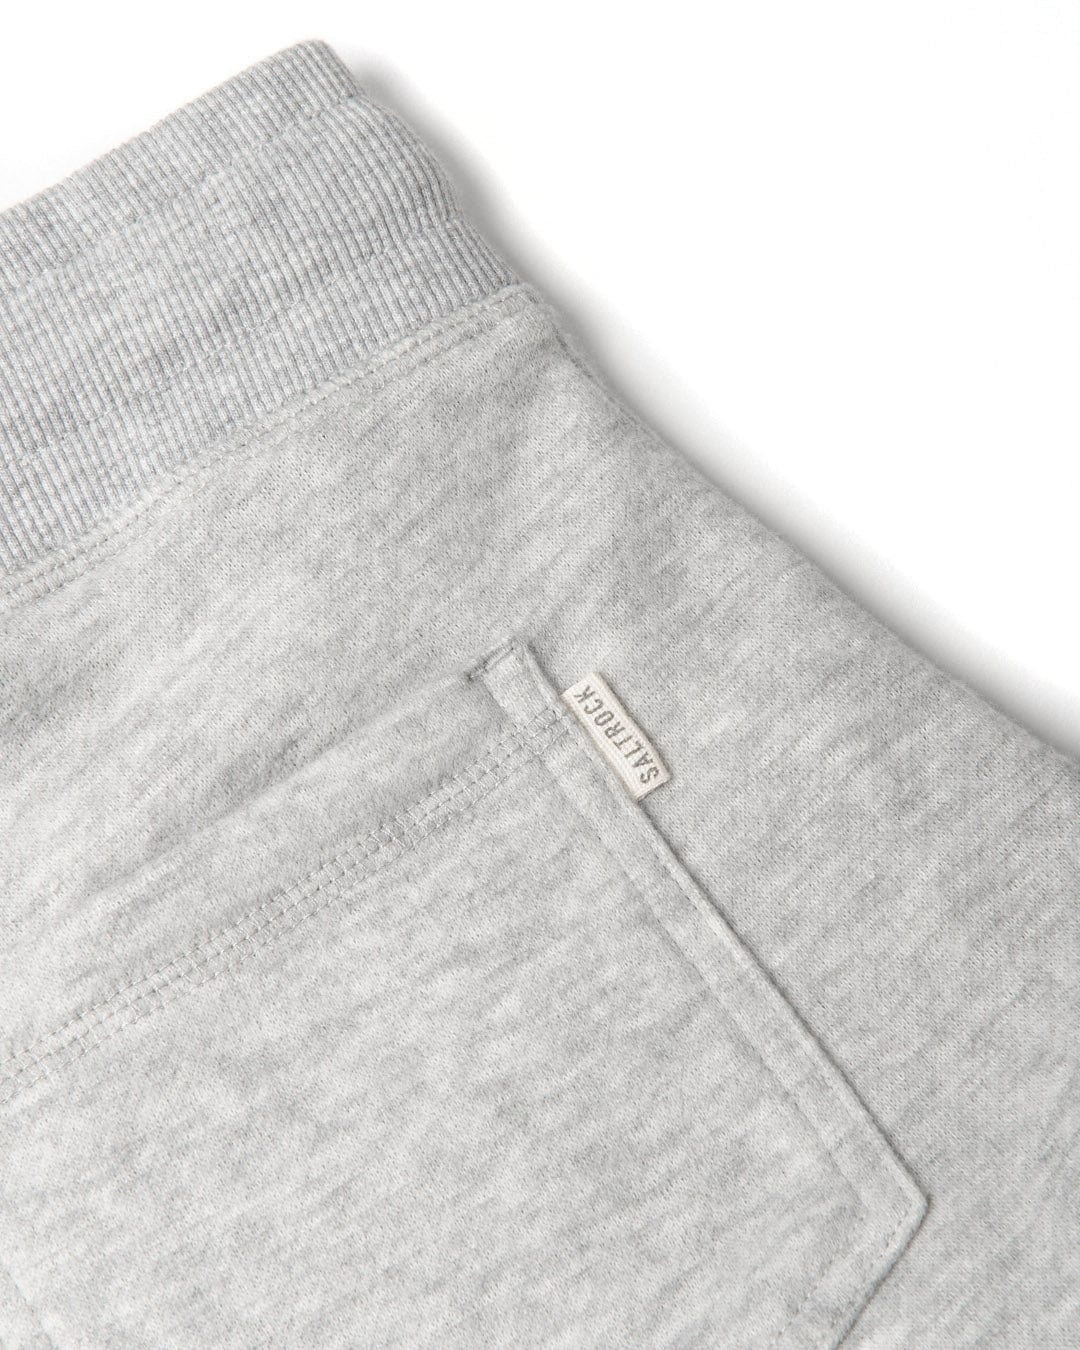 A close up of Saltrock's Velator - Womens Sweat Shorts - Light Grey with a comfortable fit.